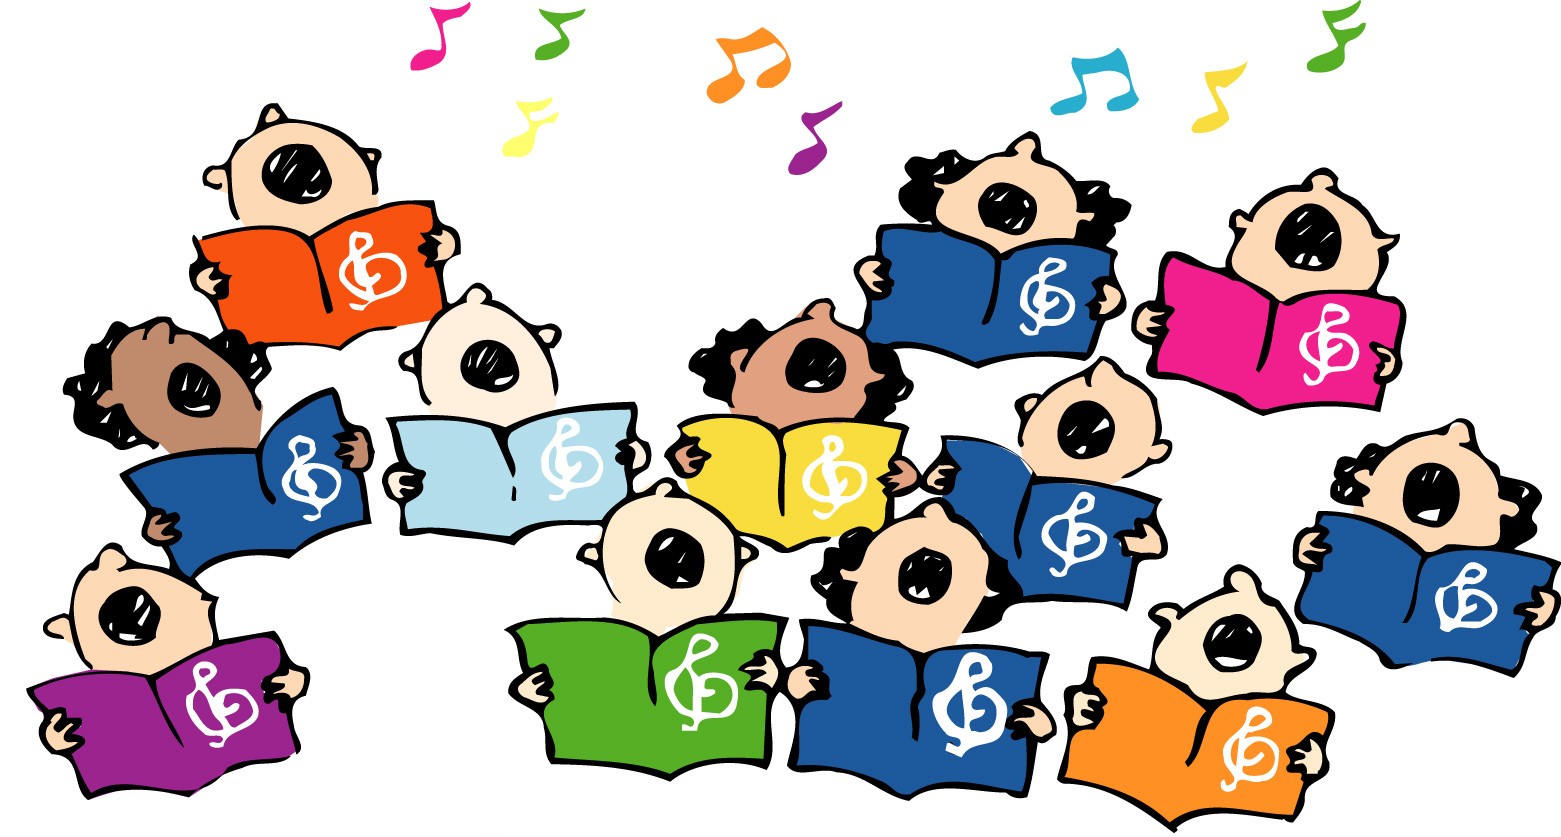 Free Choir Singers Cliparts, Download Free Clip Art, Free.